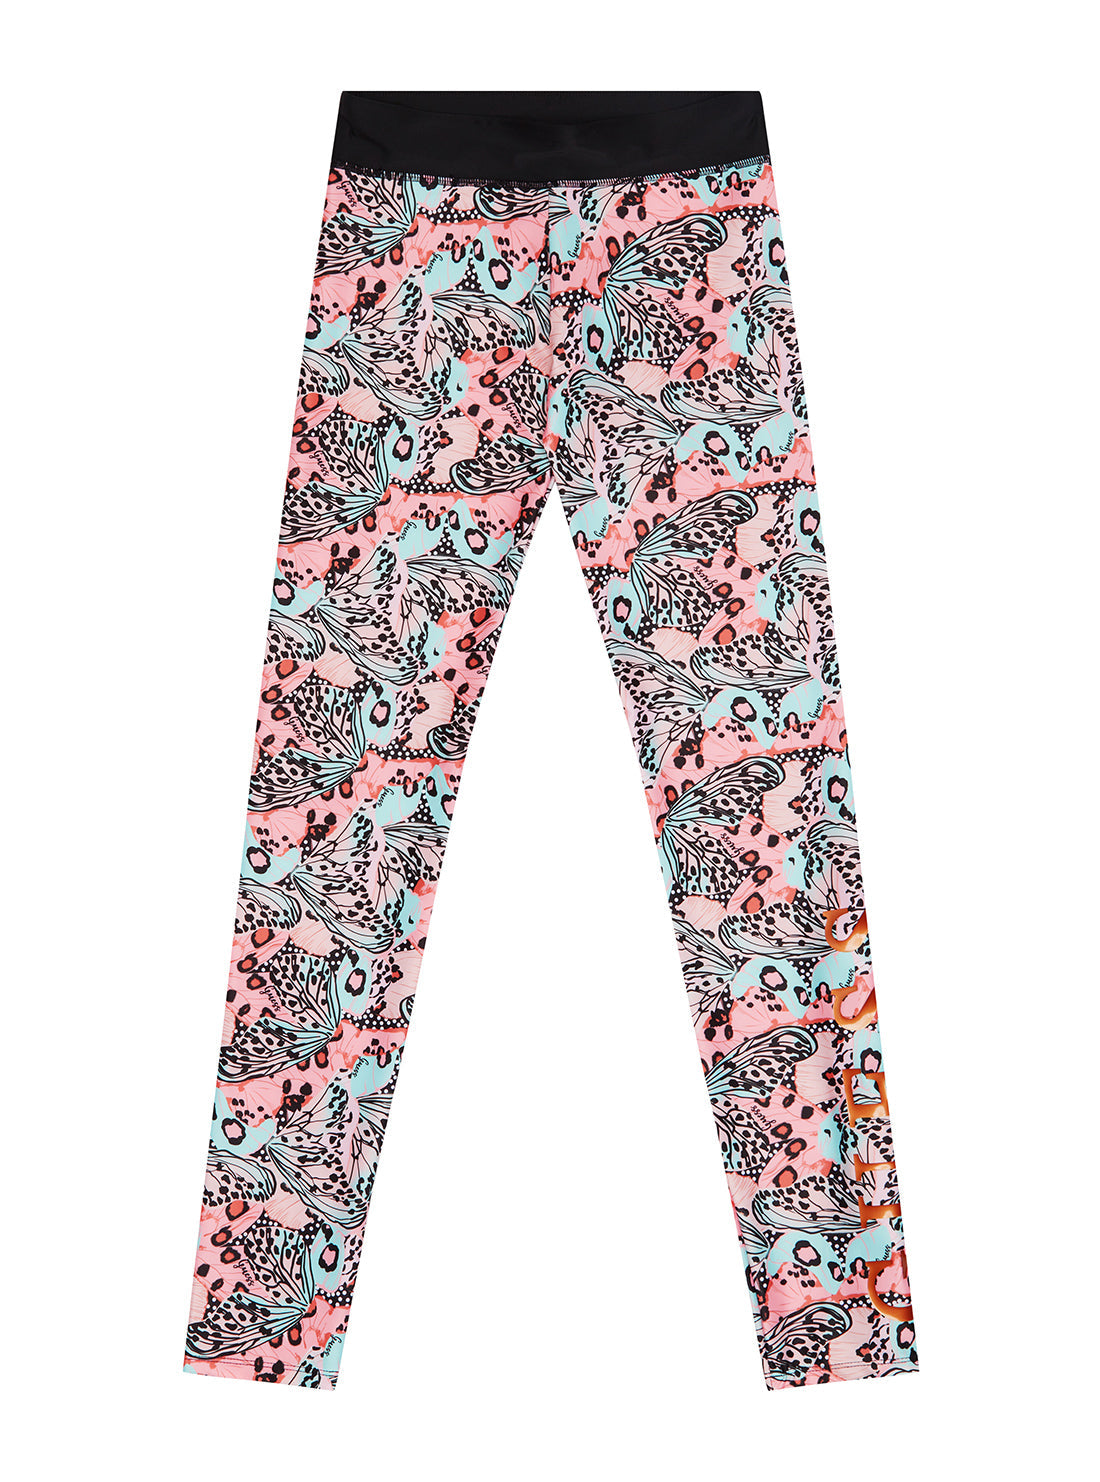 GUESS Kids Girls Pink Butterfly Printed Active Leggings (7-16) J1BB02MC01 Front View